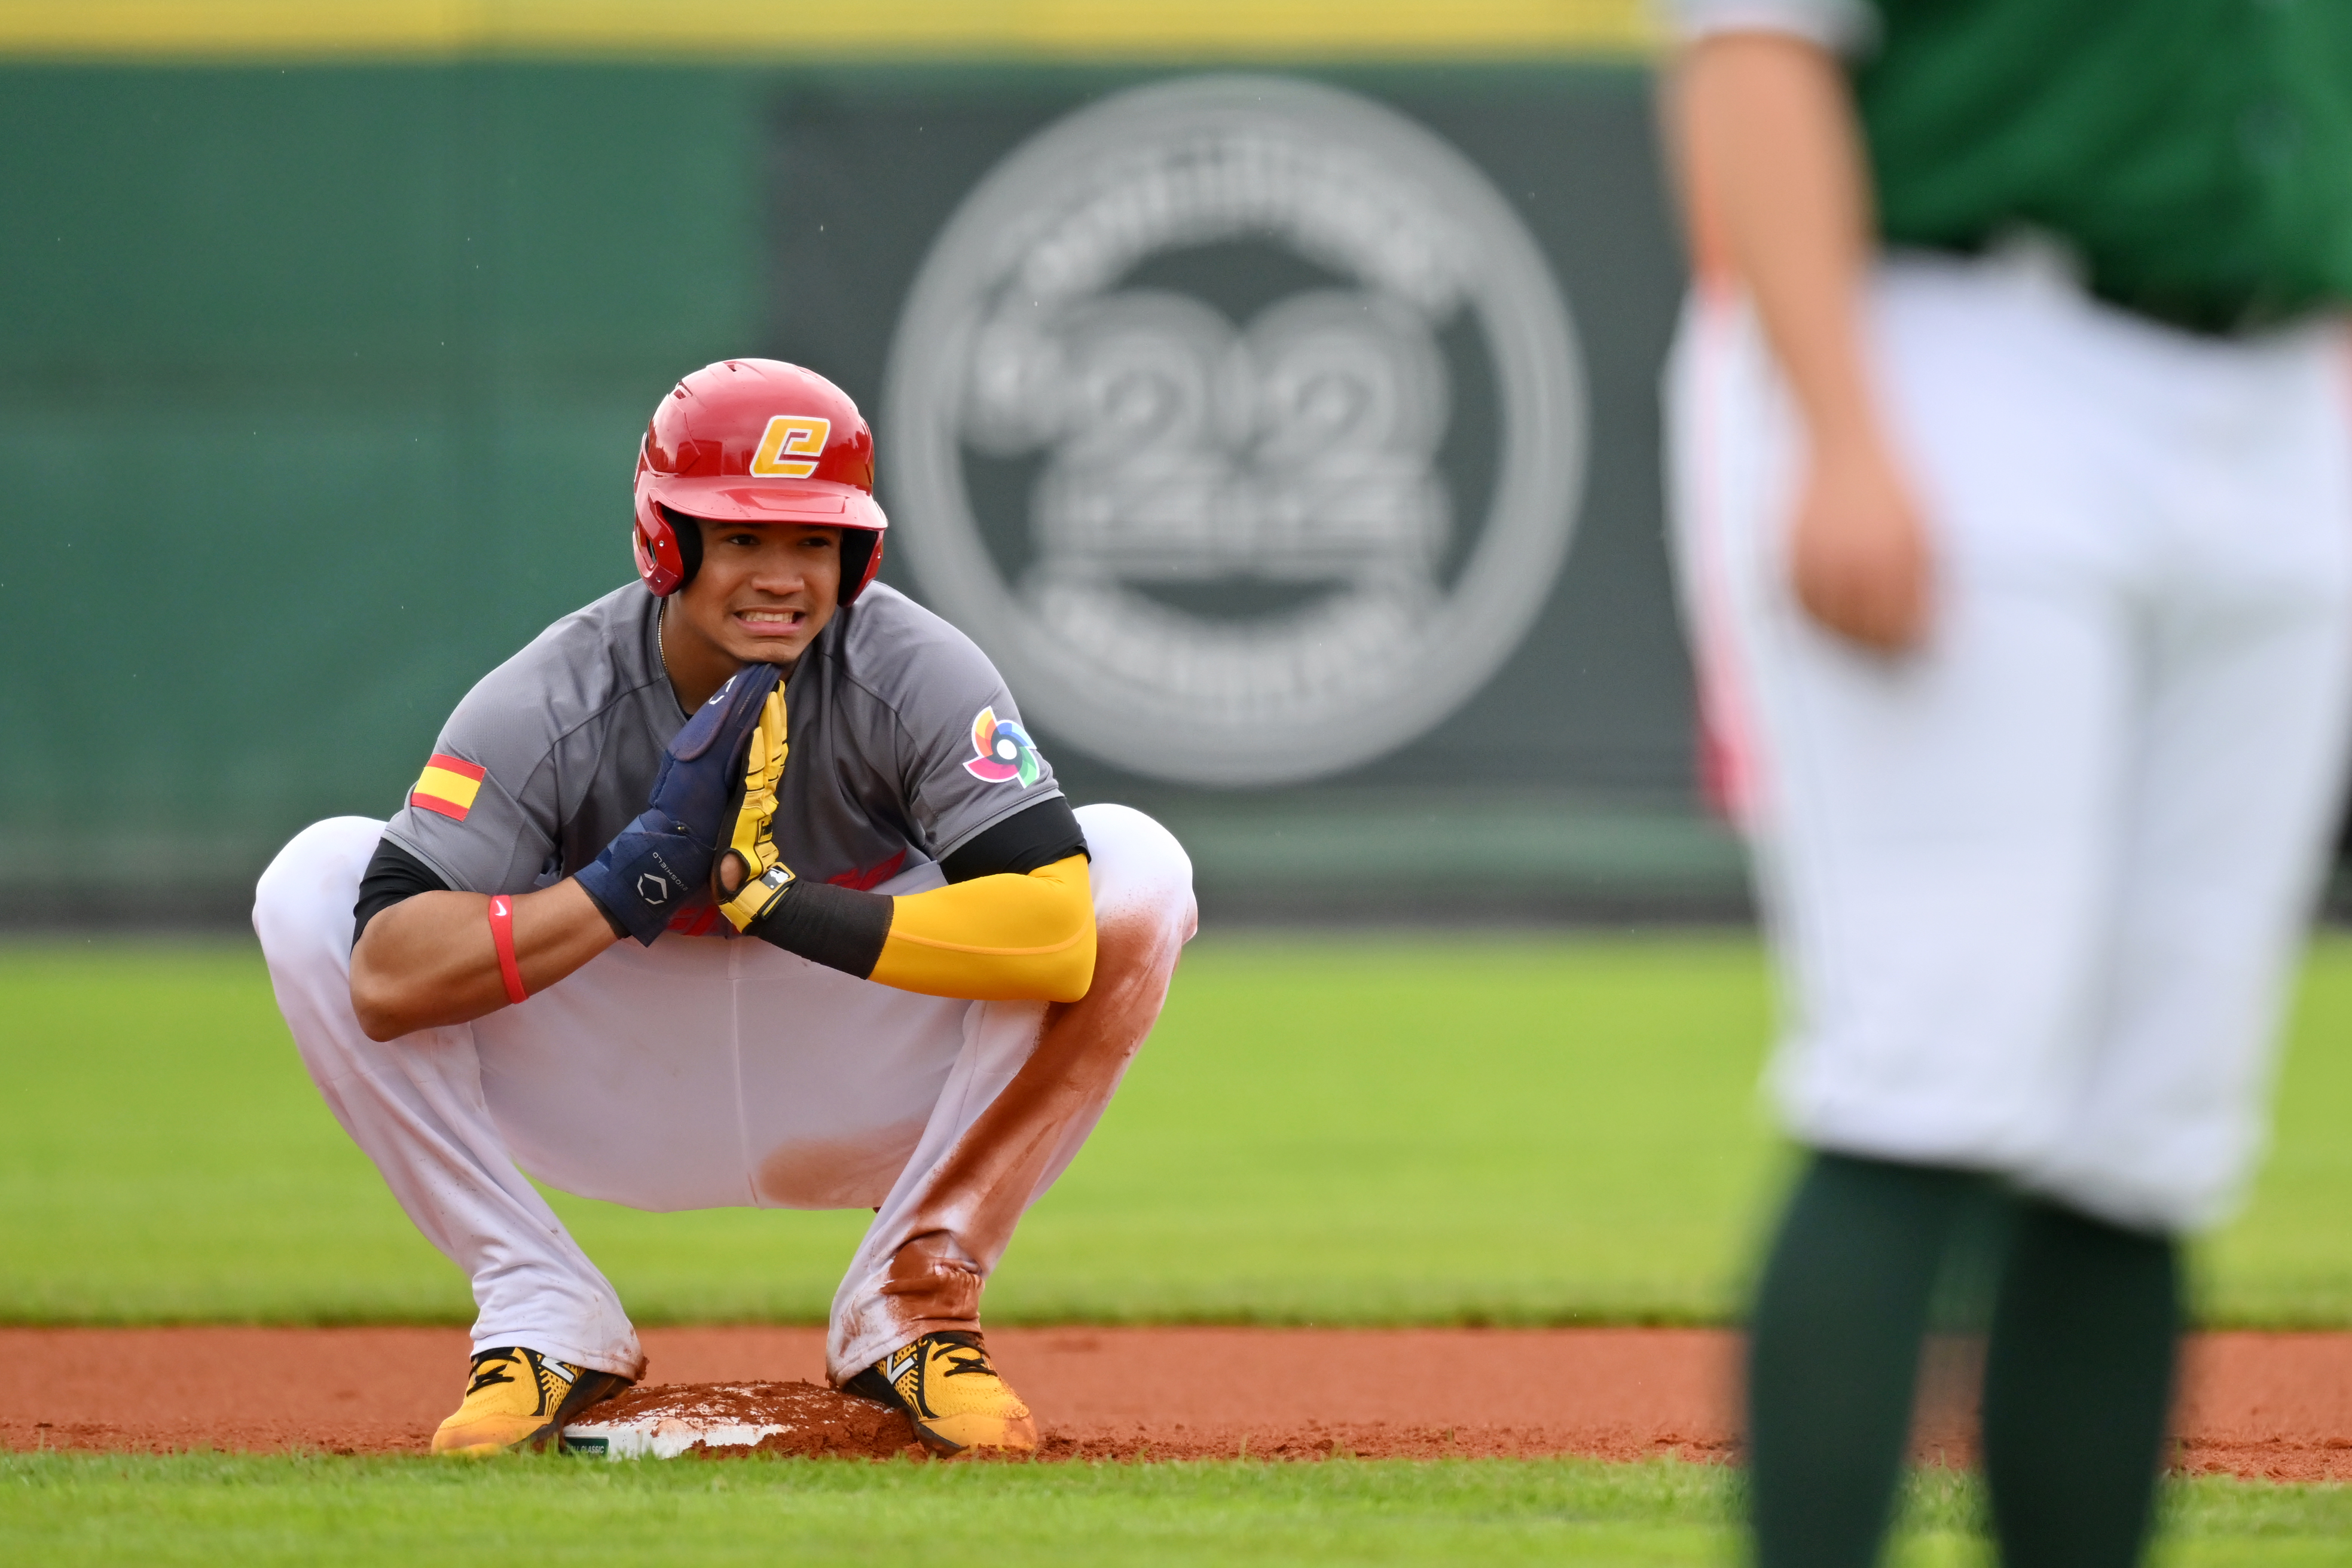 2022 World Baseball Classic Qualifier Game 1: South Africa v. Spain